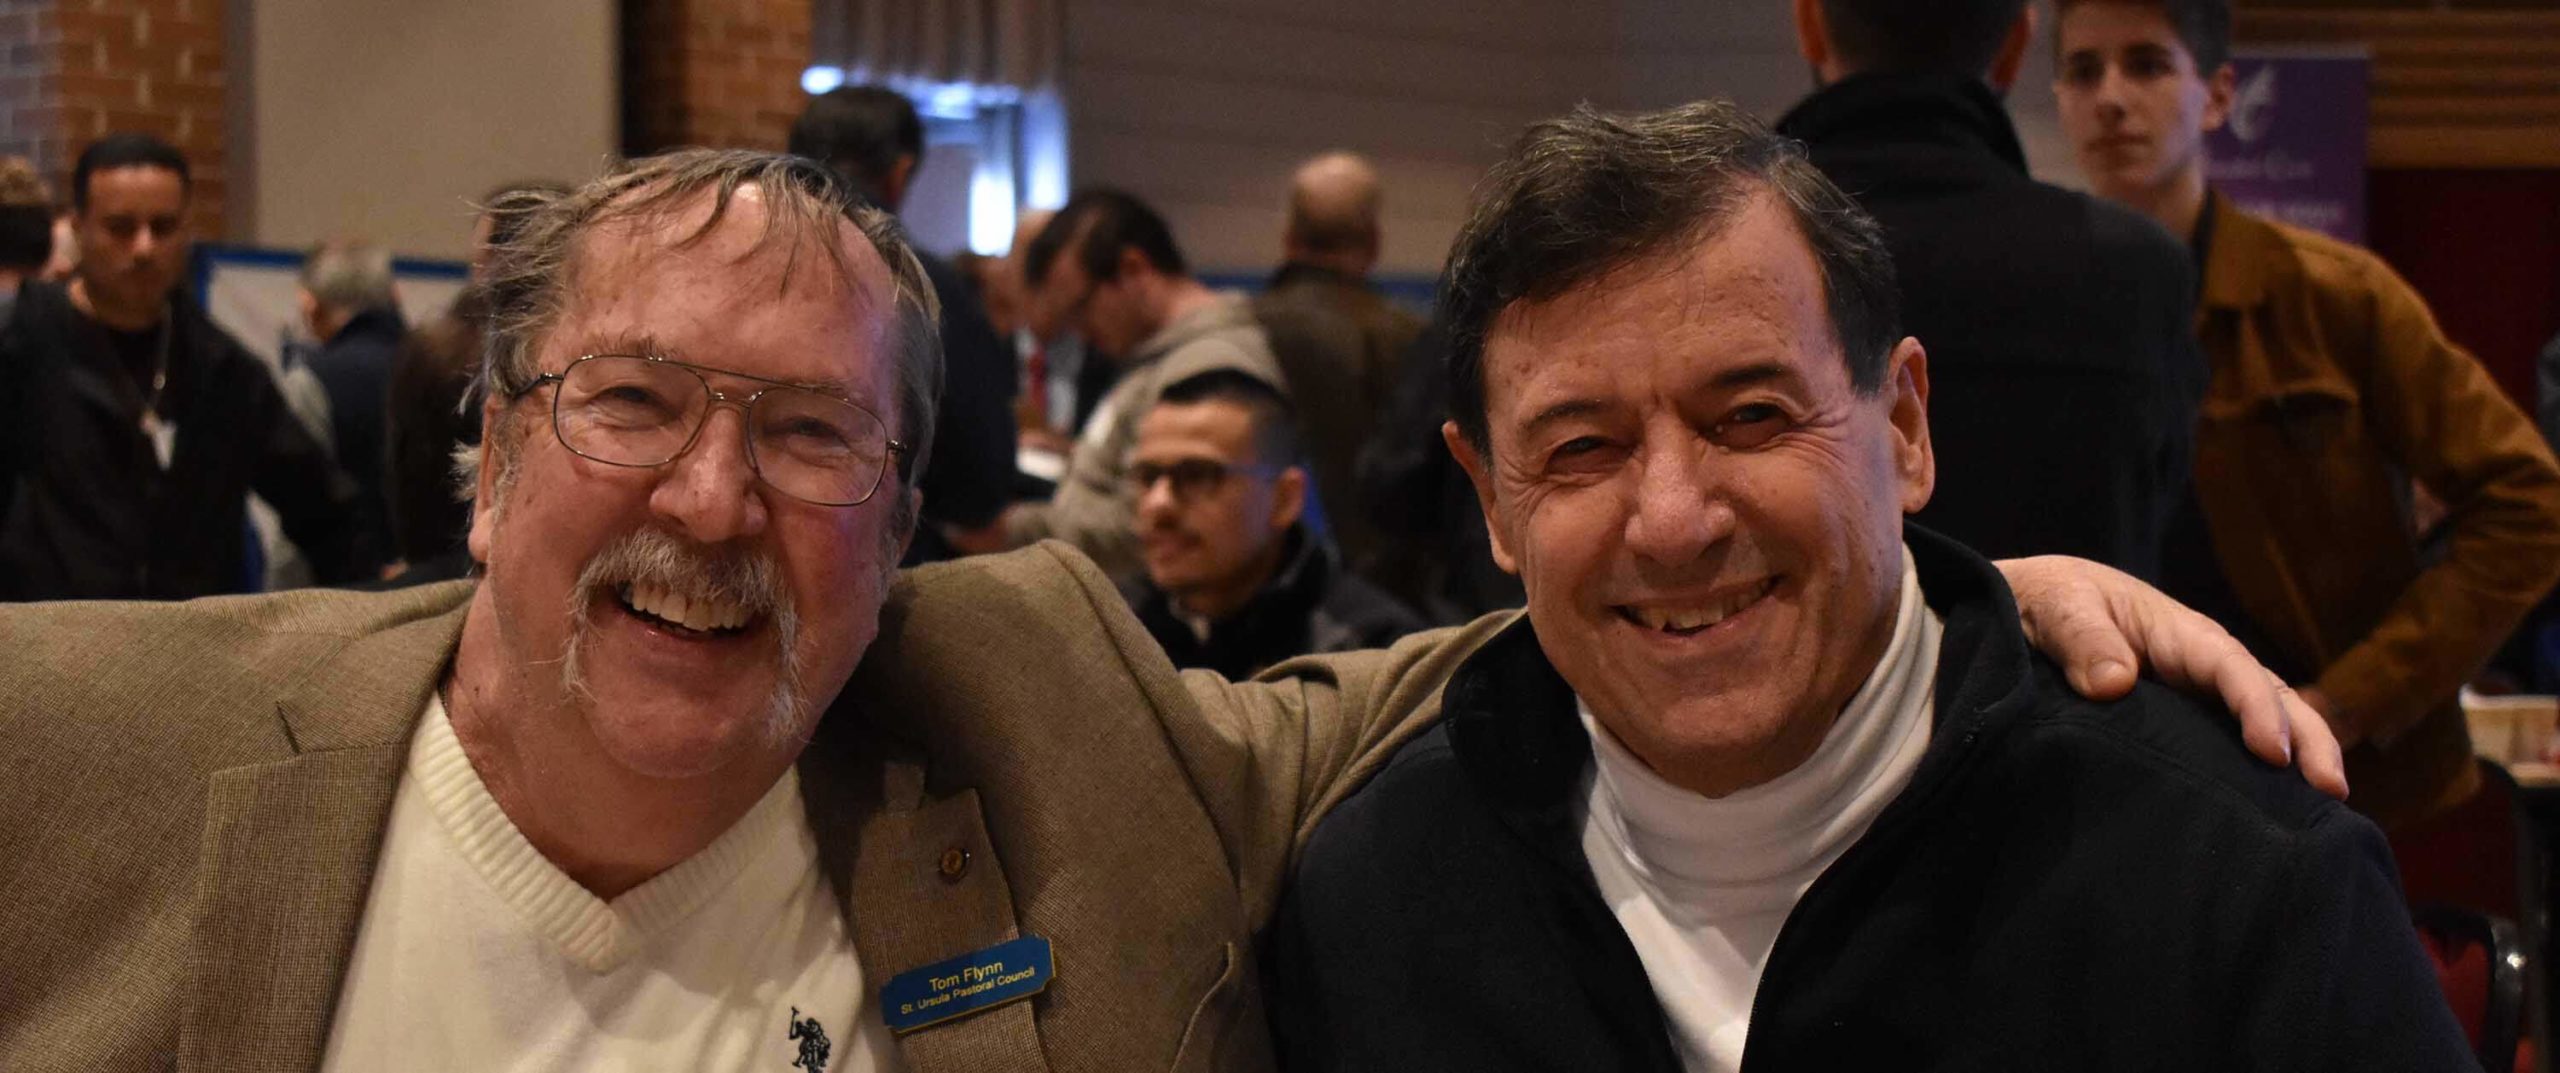 Catholic Men’s Fellowship of Maryland conference elicits emotion, inspires action